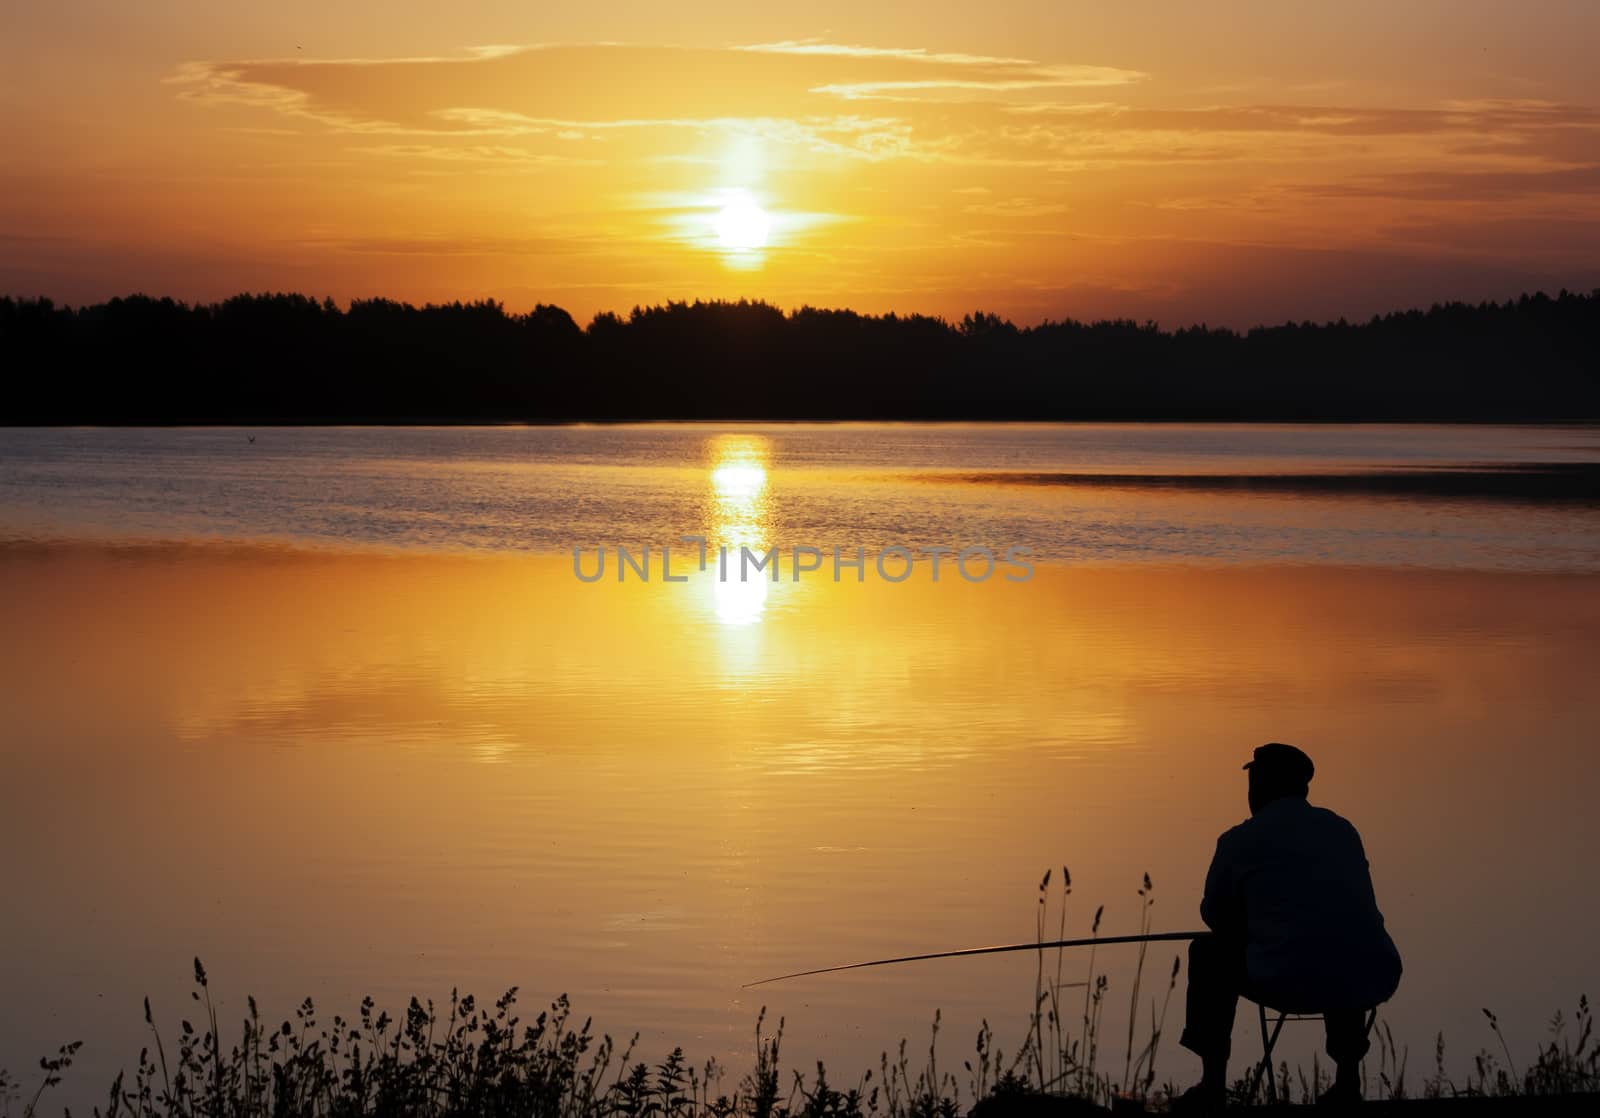 View of fisherman silhouette. Sunset over the lake